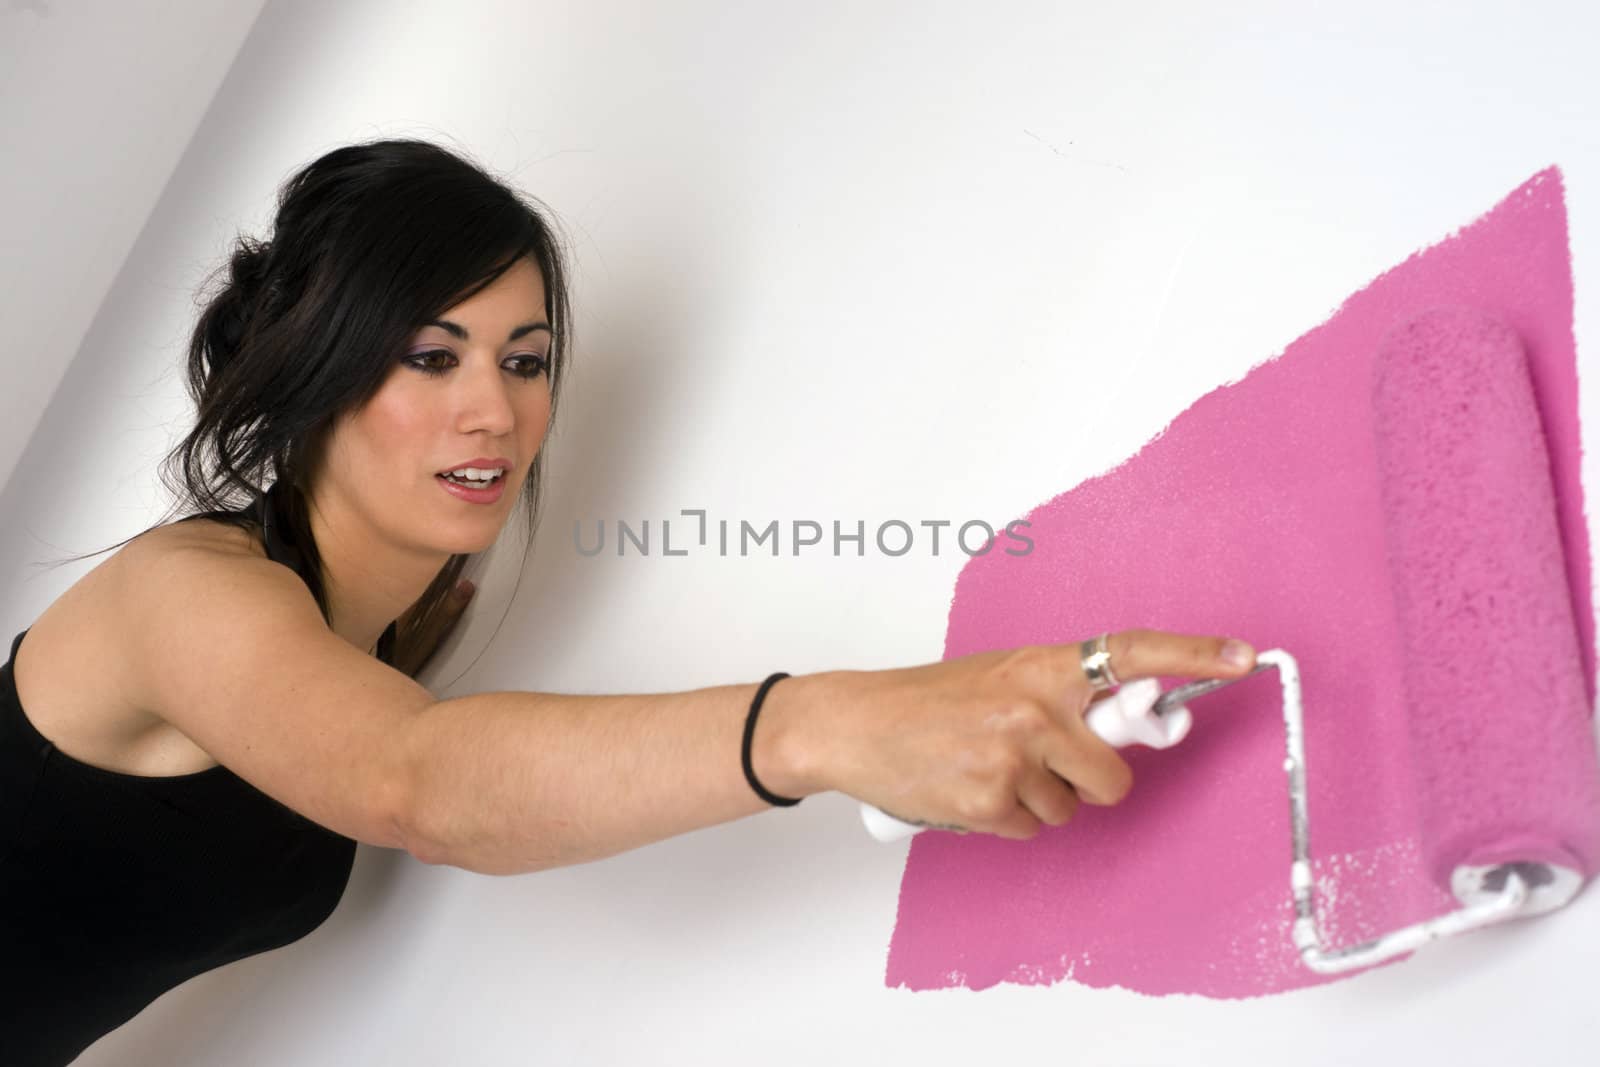 A beautiful woman paints the wall pink